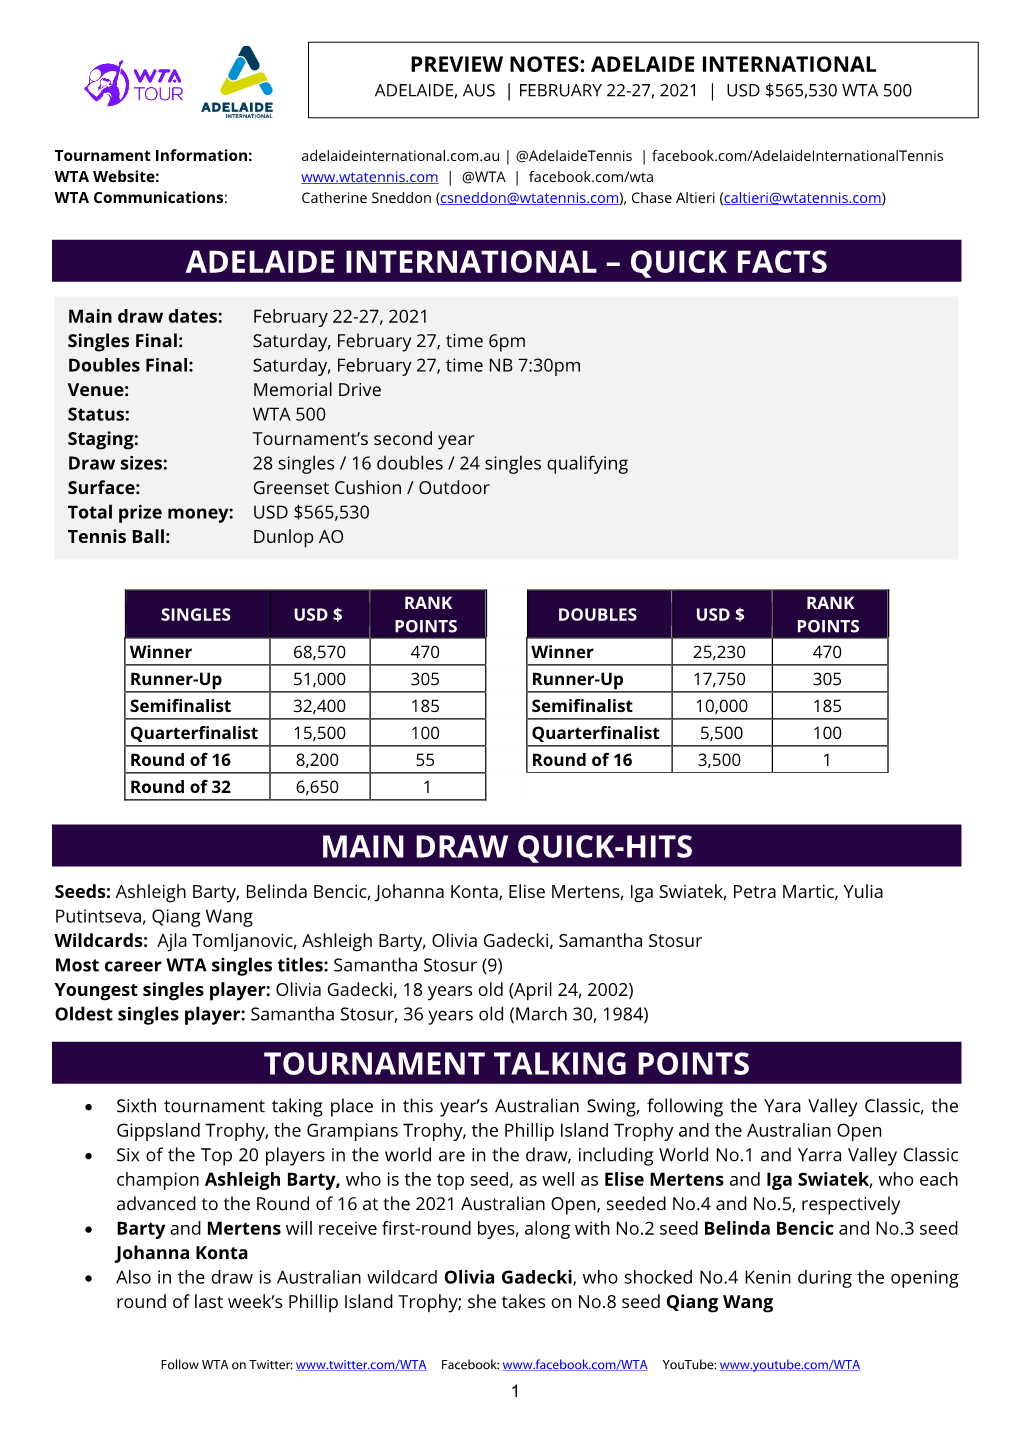 Quick Facts Main Draw Quick-Hits Tournament